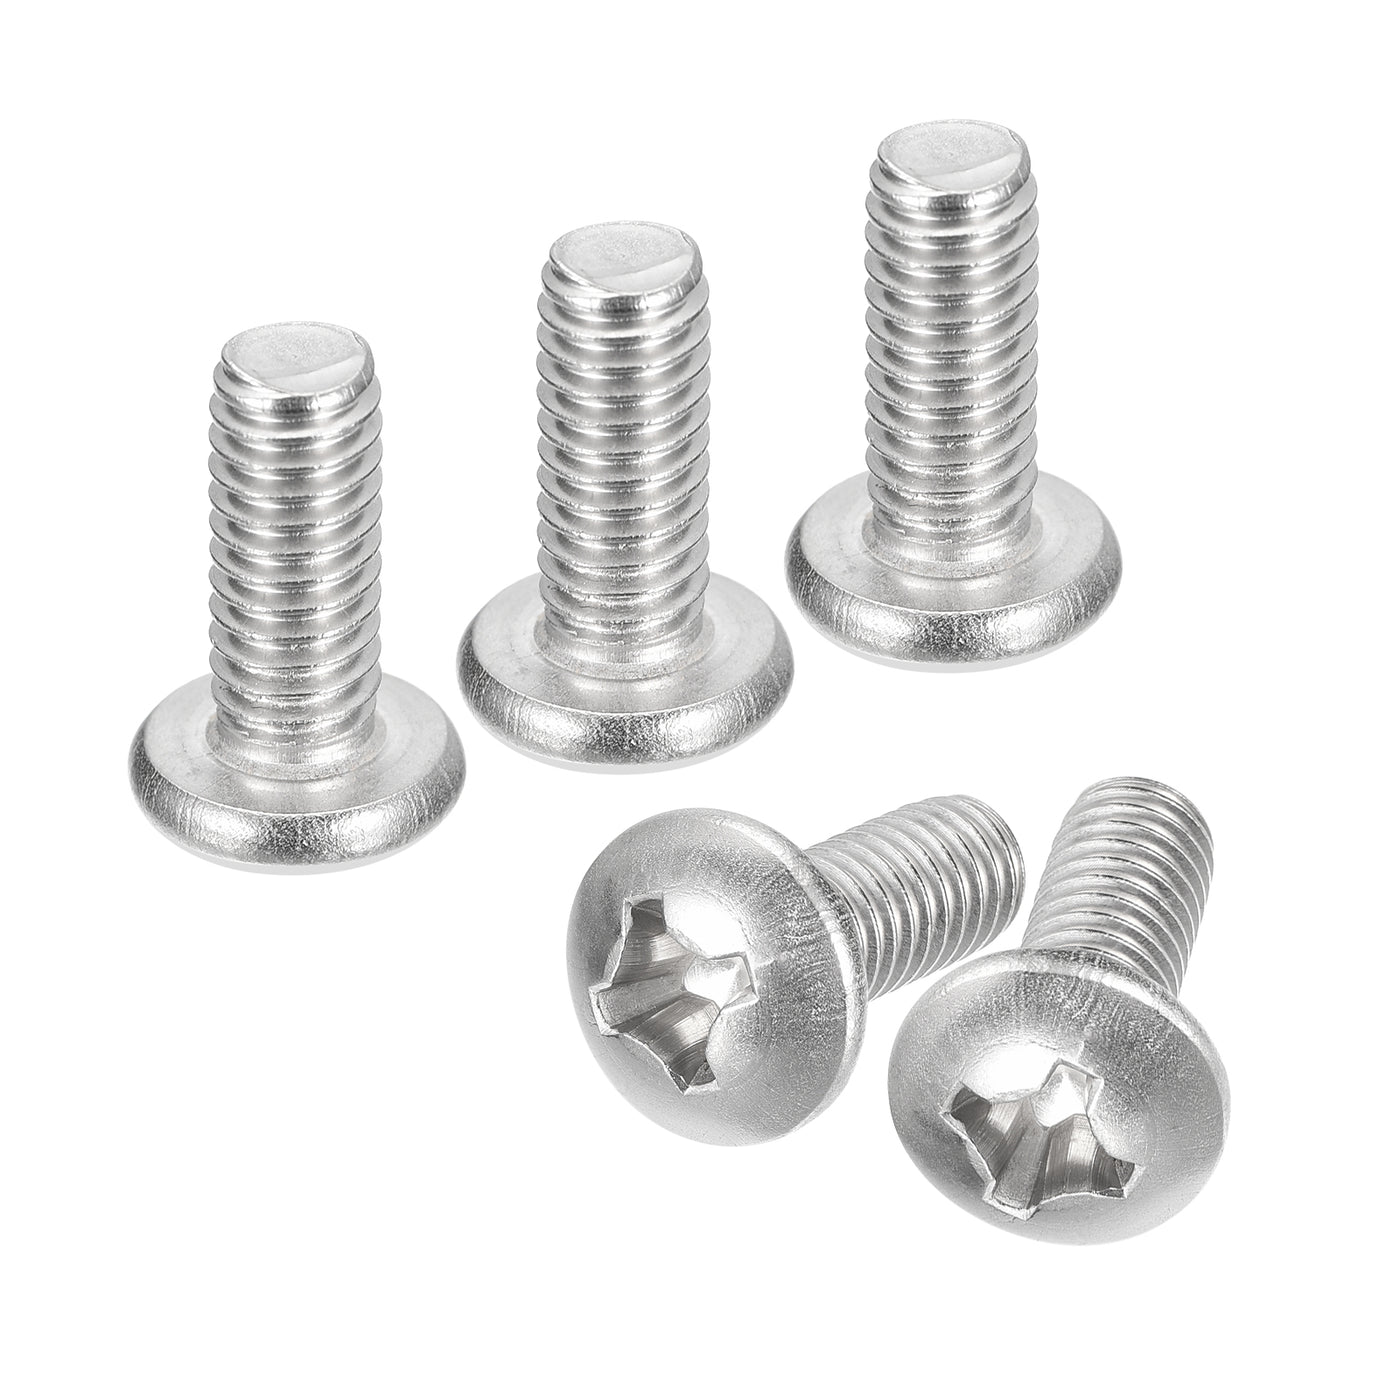 uxcell Uxcell 5/16-18x3/4" Pan Head Machine Screws, Stainless Steel 18-8 Screw, Pack of 10